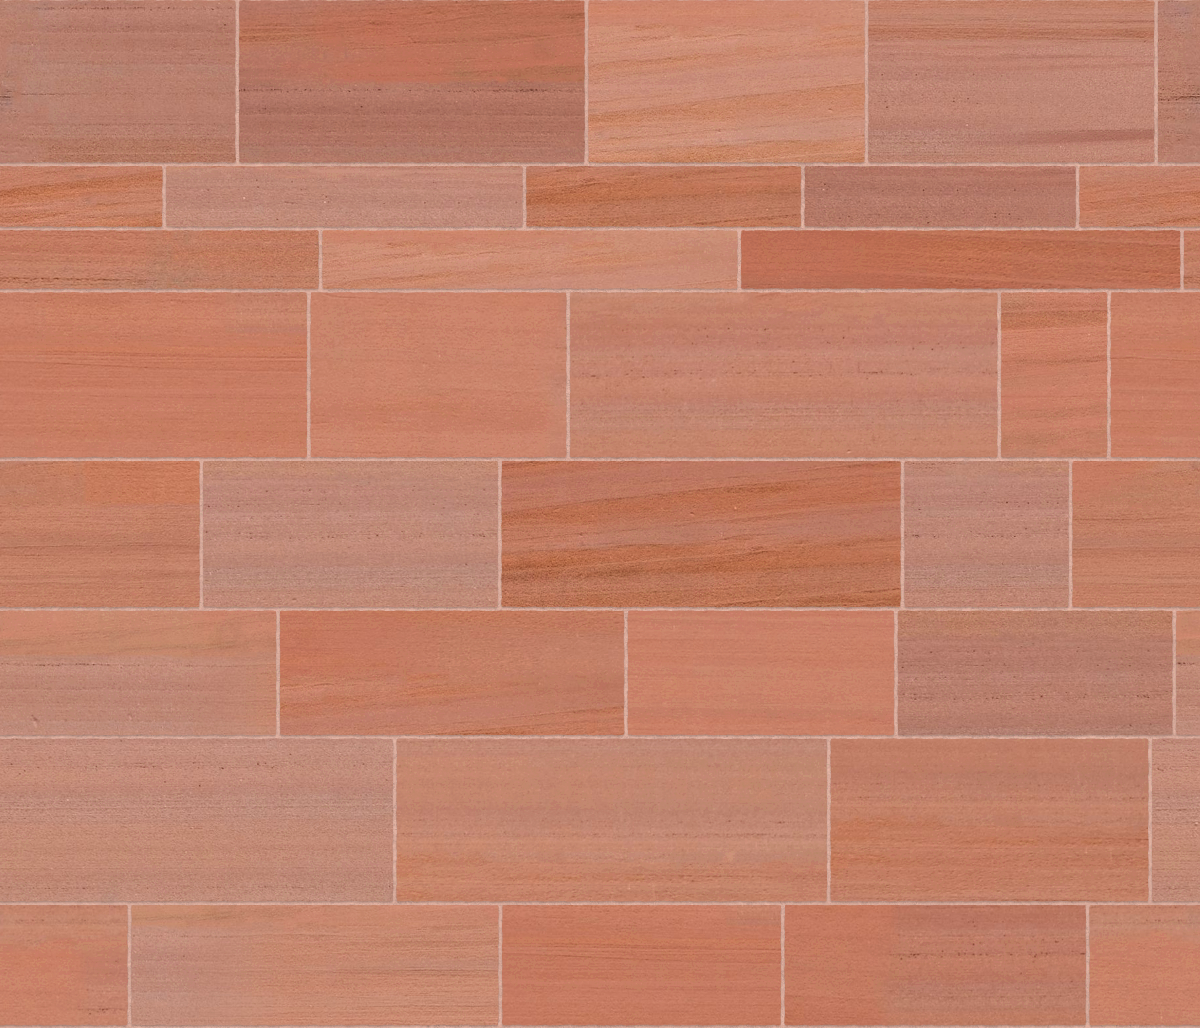 A seamless stone texture with red sandstone blocks arranged in a Ashlar pattern